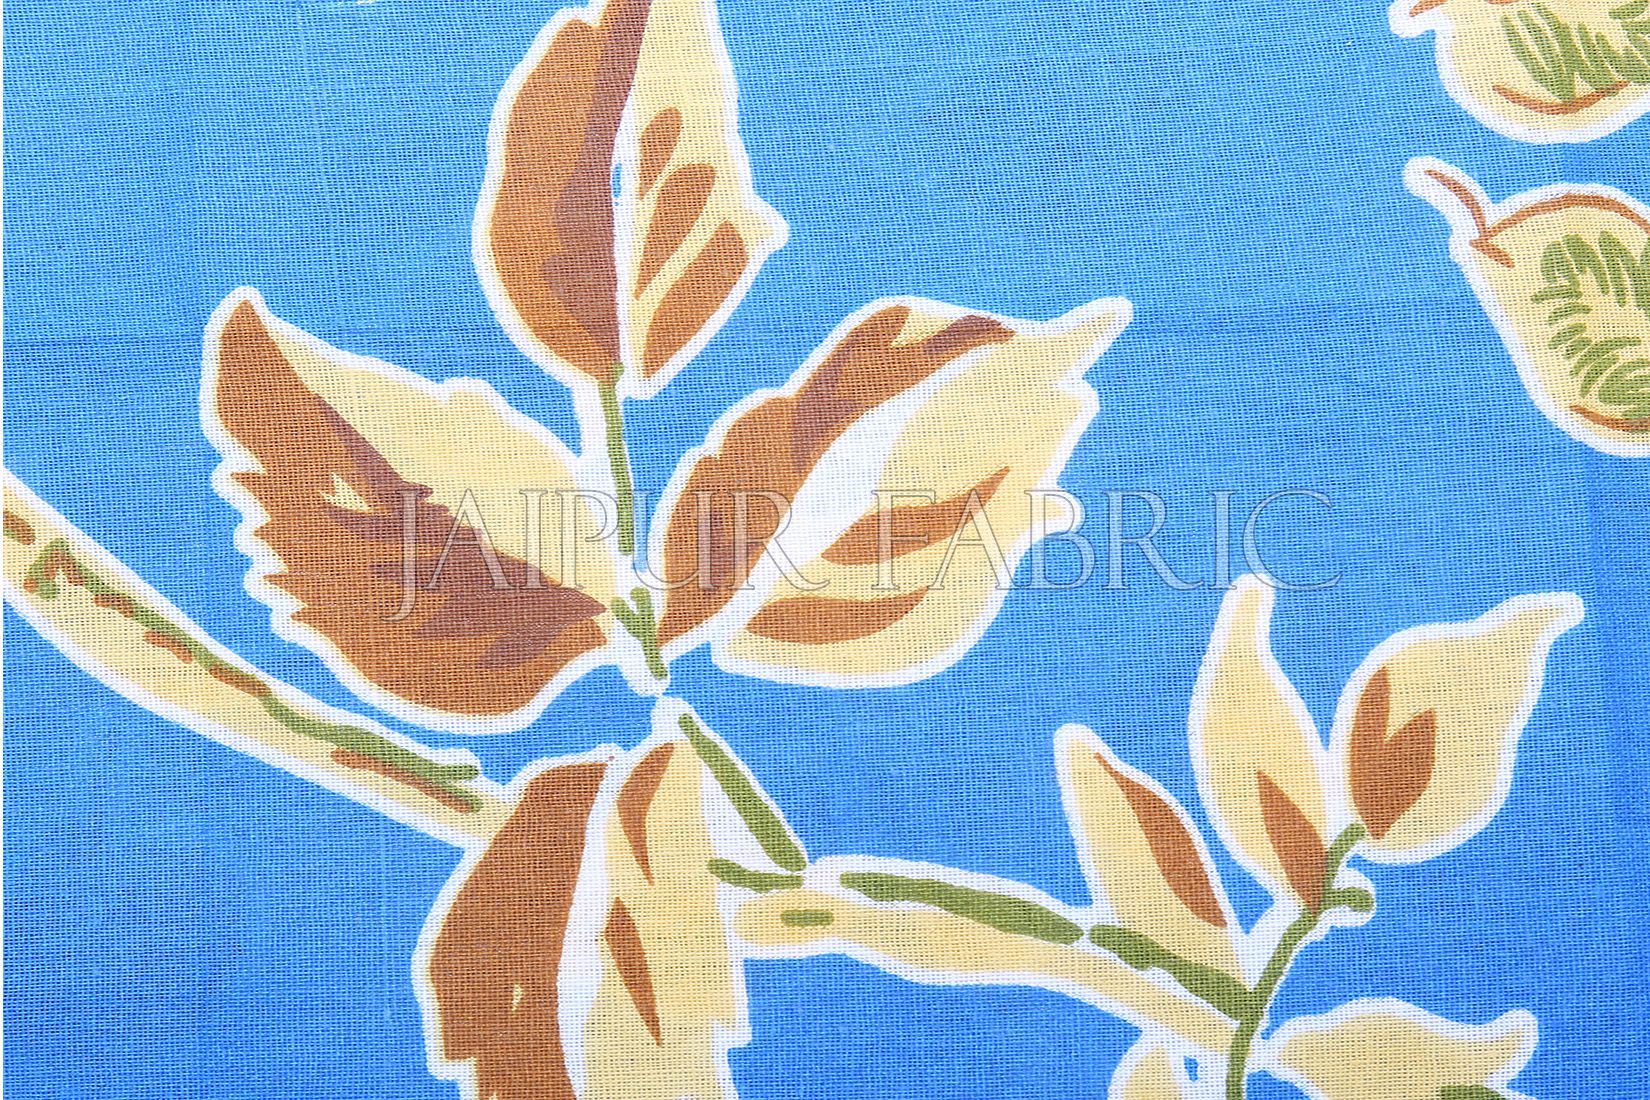 Blue Base Tropical Butterfly Design Double Bed Sheet